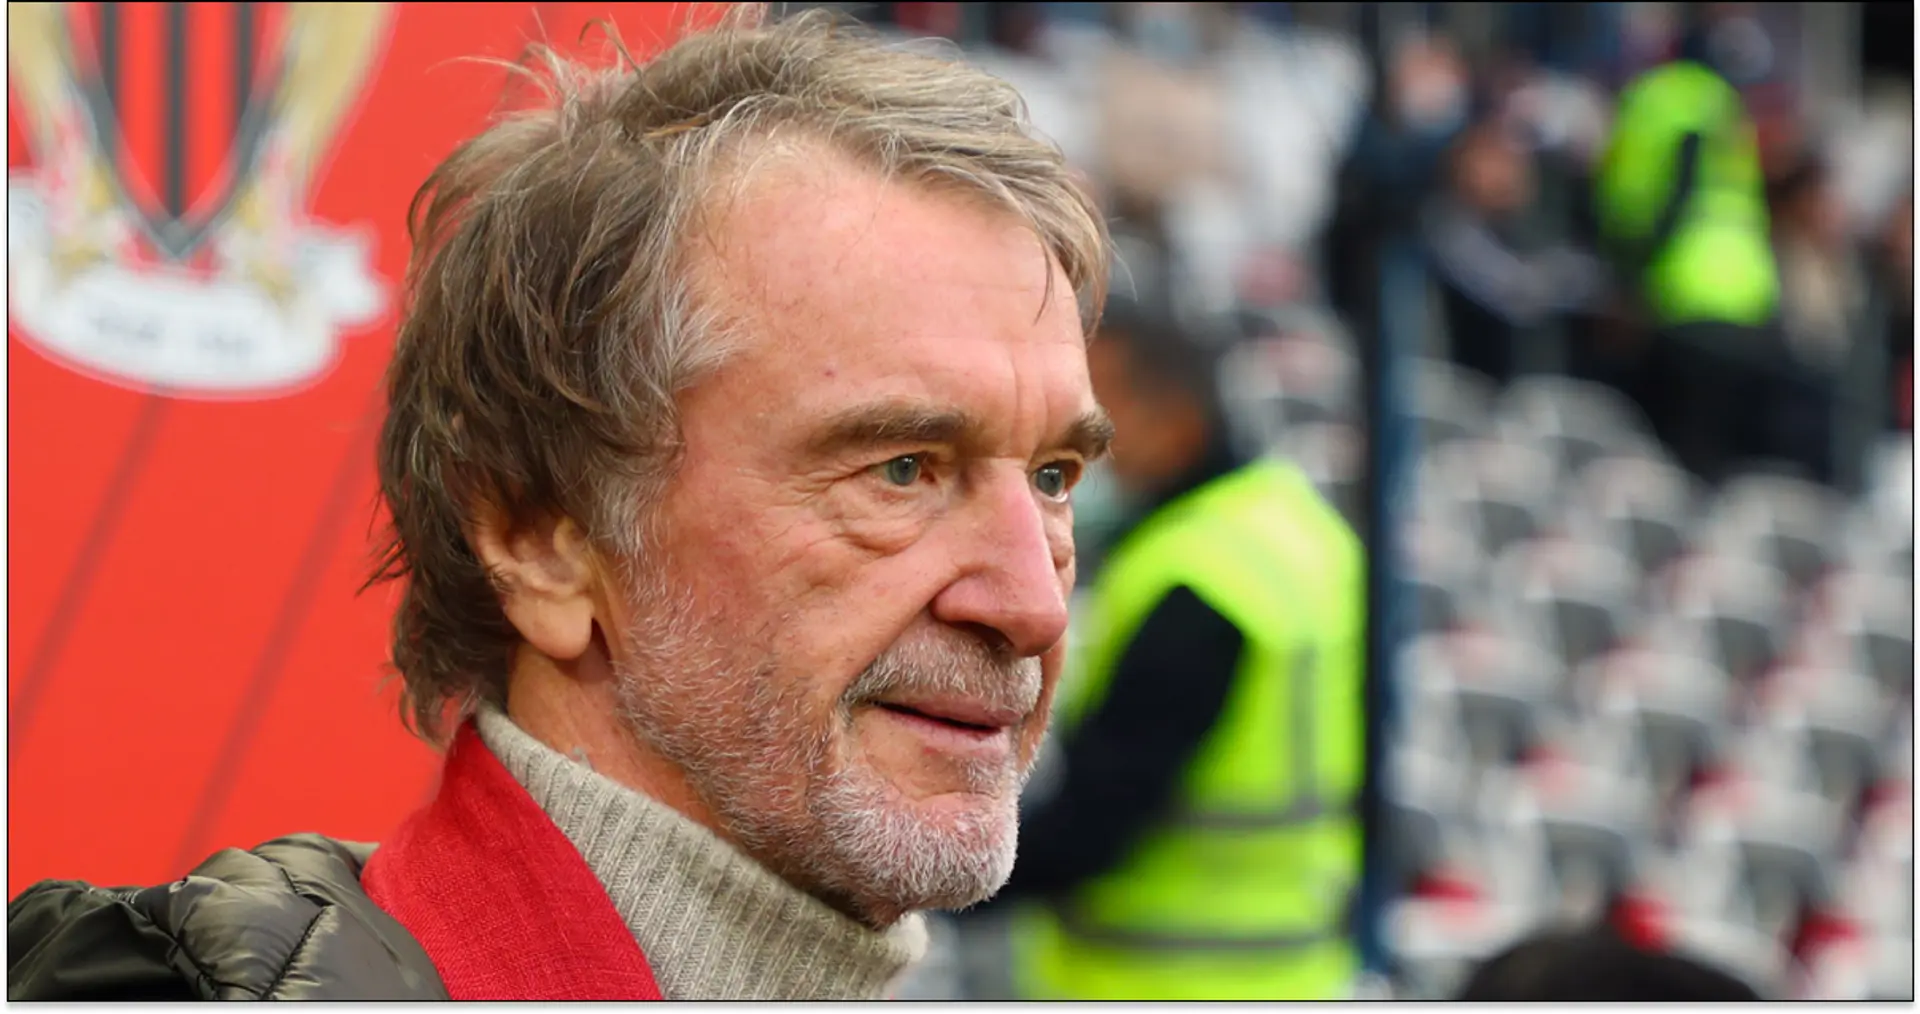 Richest Briton Jim Ratcliffe 'rules himself out' of buying Liverpool